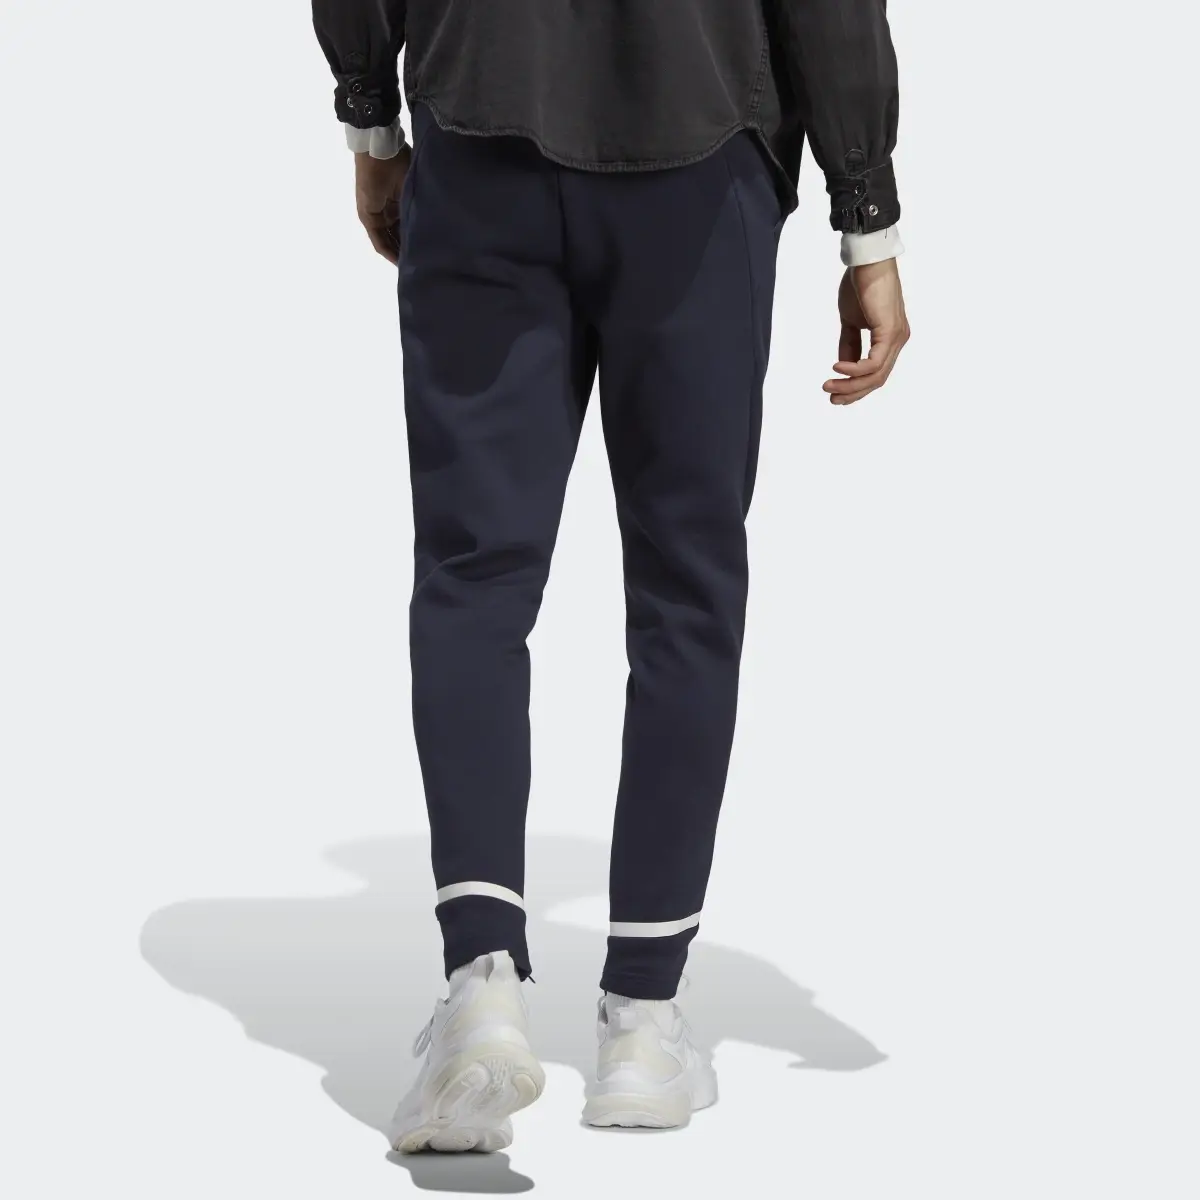 Adidas Designed for Gameday Tracksuit Bottoms. 2